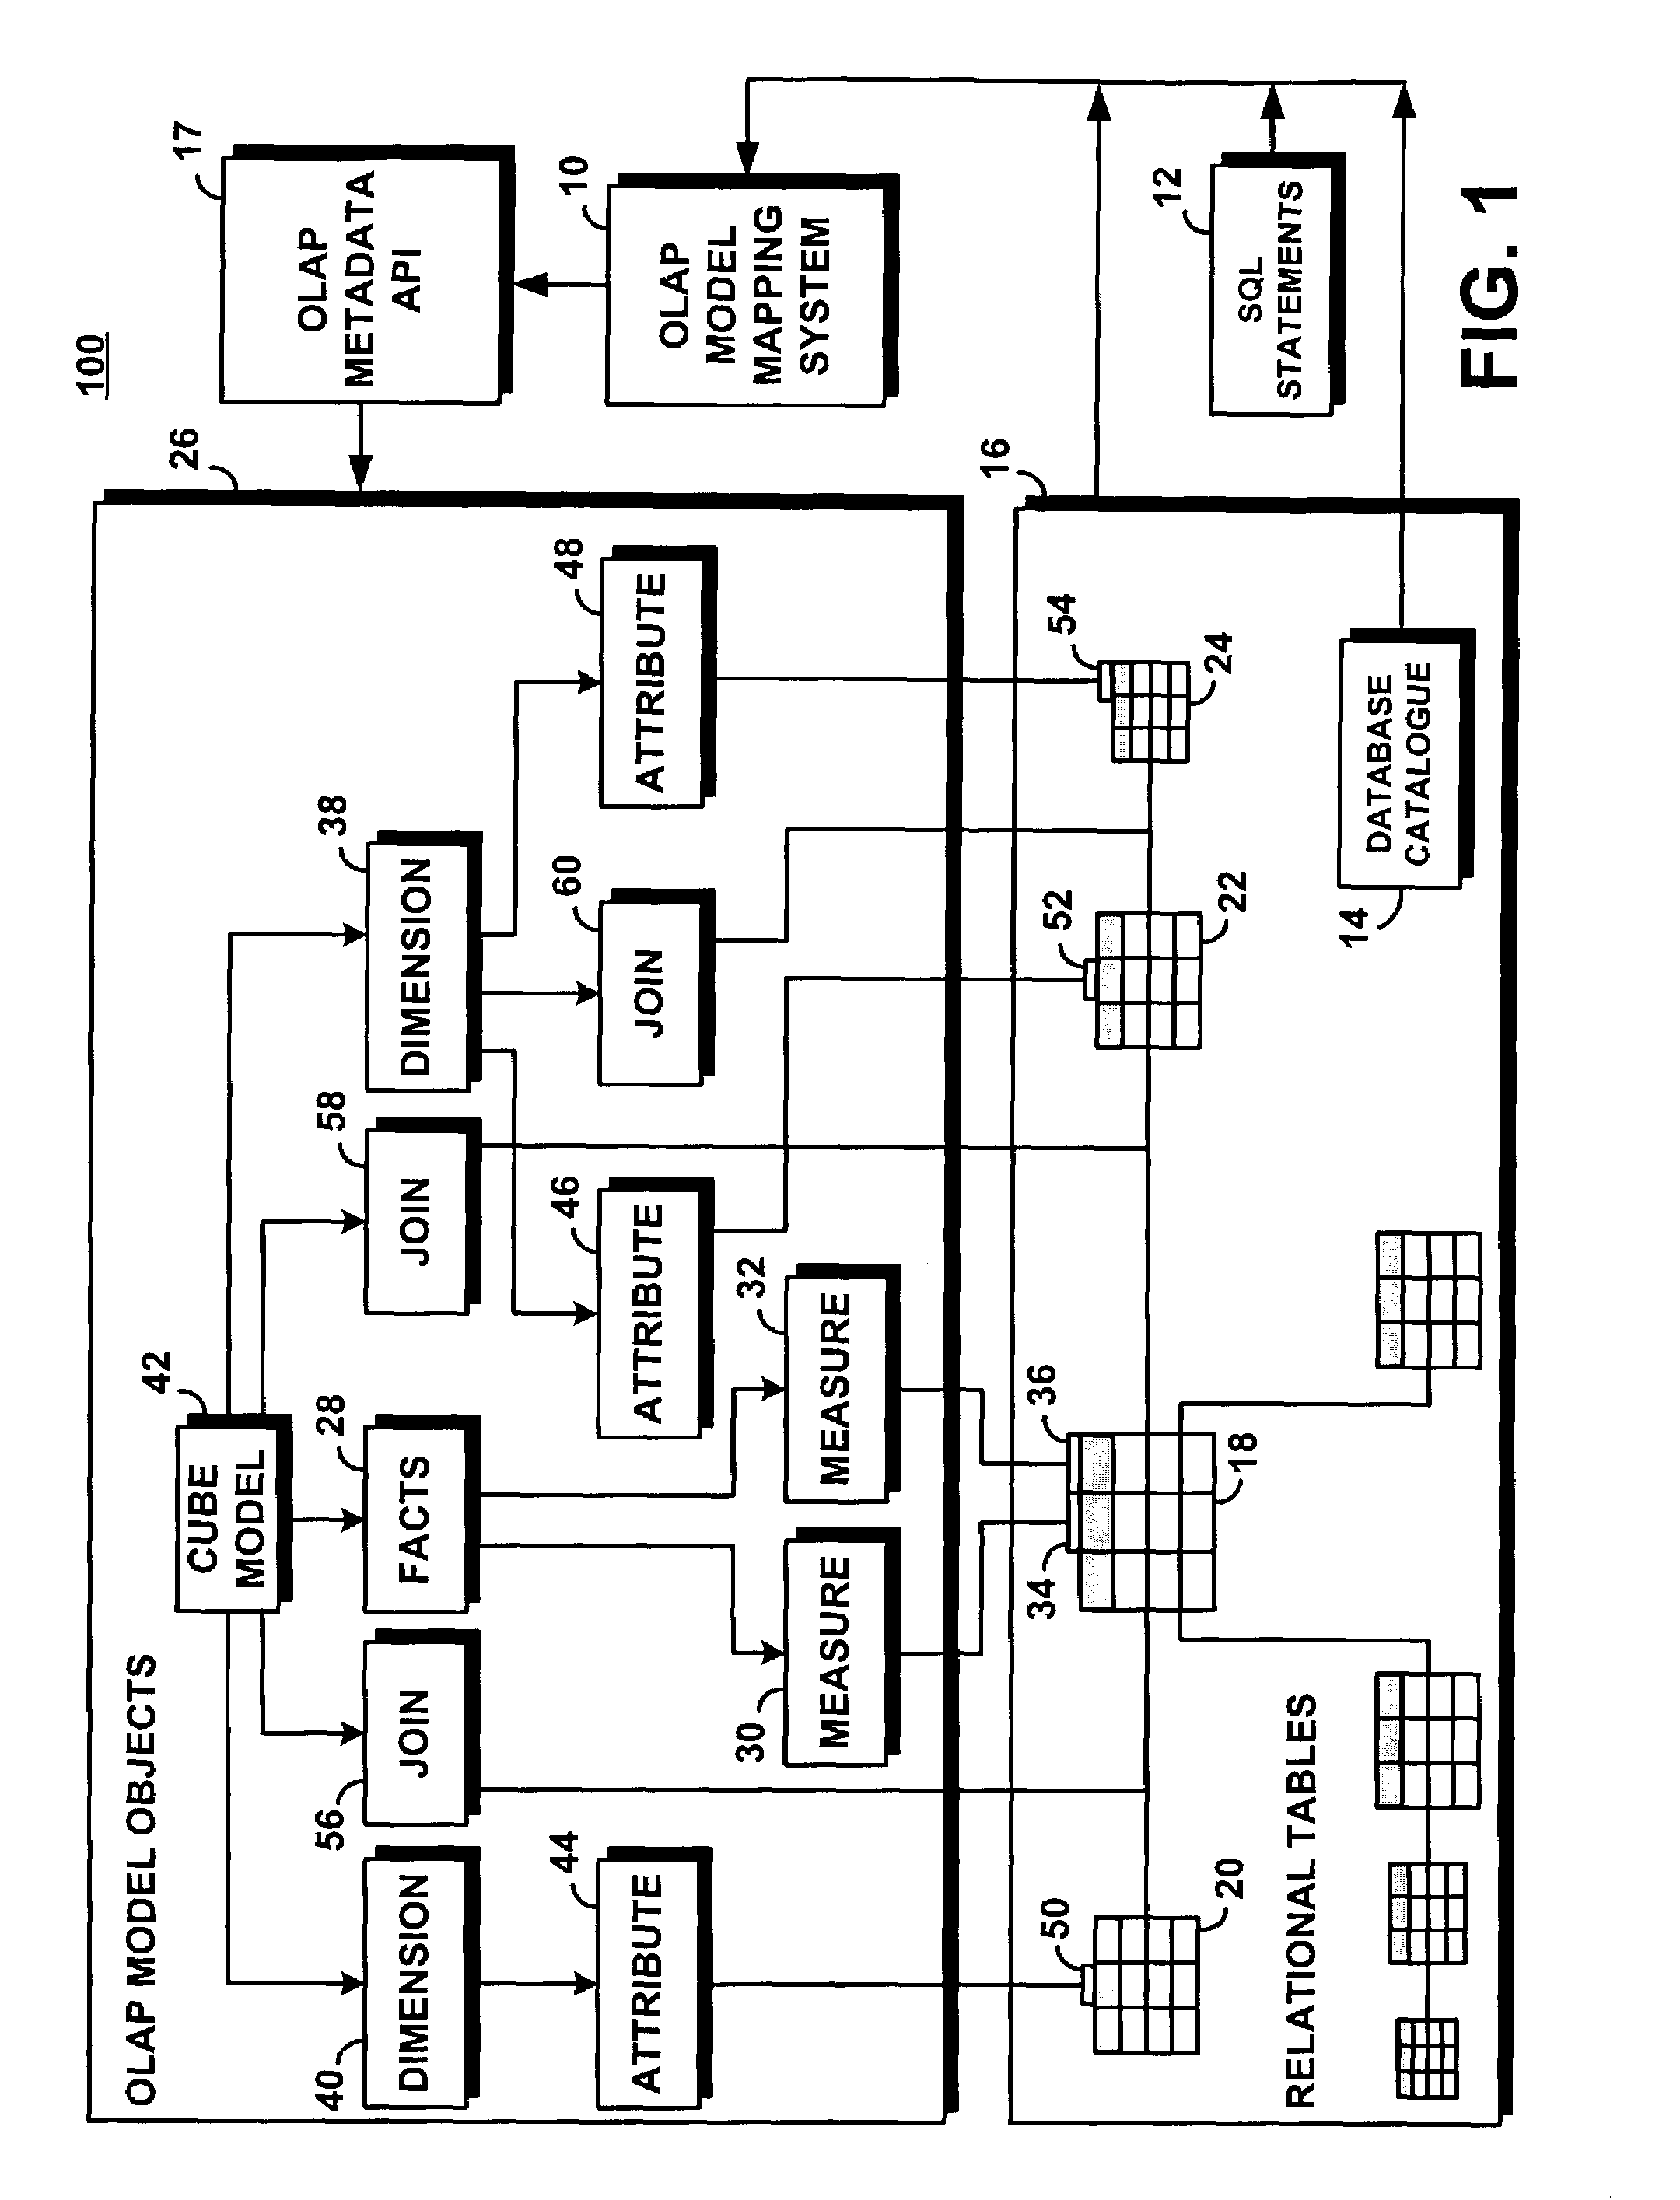 System and method for automatically building an OLAP model in a relational database